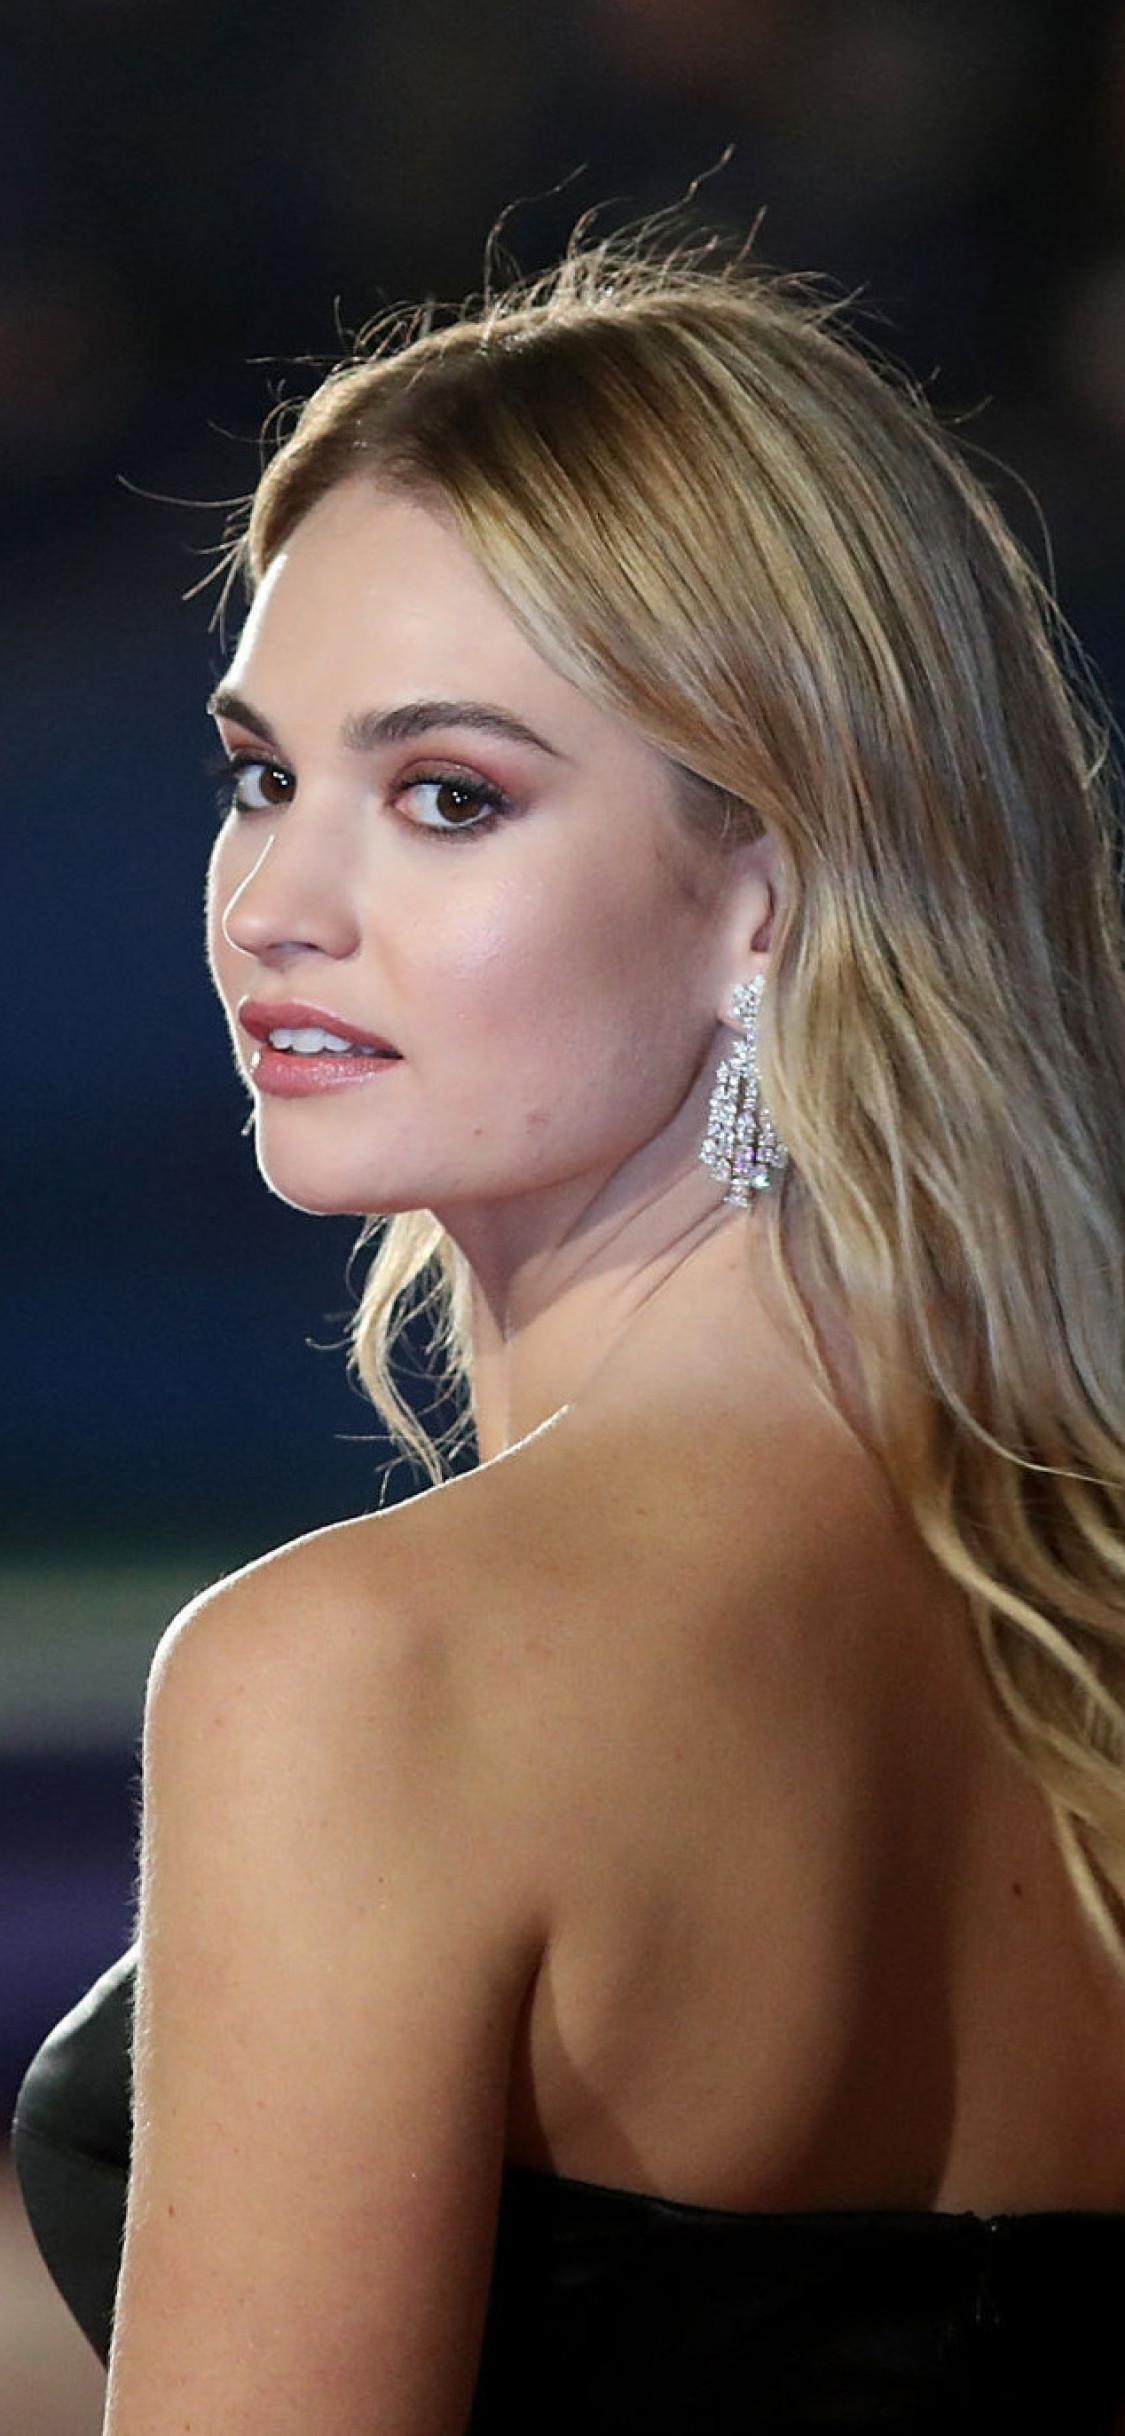 Lily James HD 2018 iPhone XS, iPhone iPhone X HD 4k